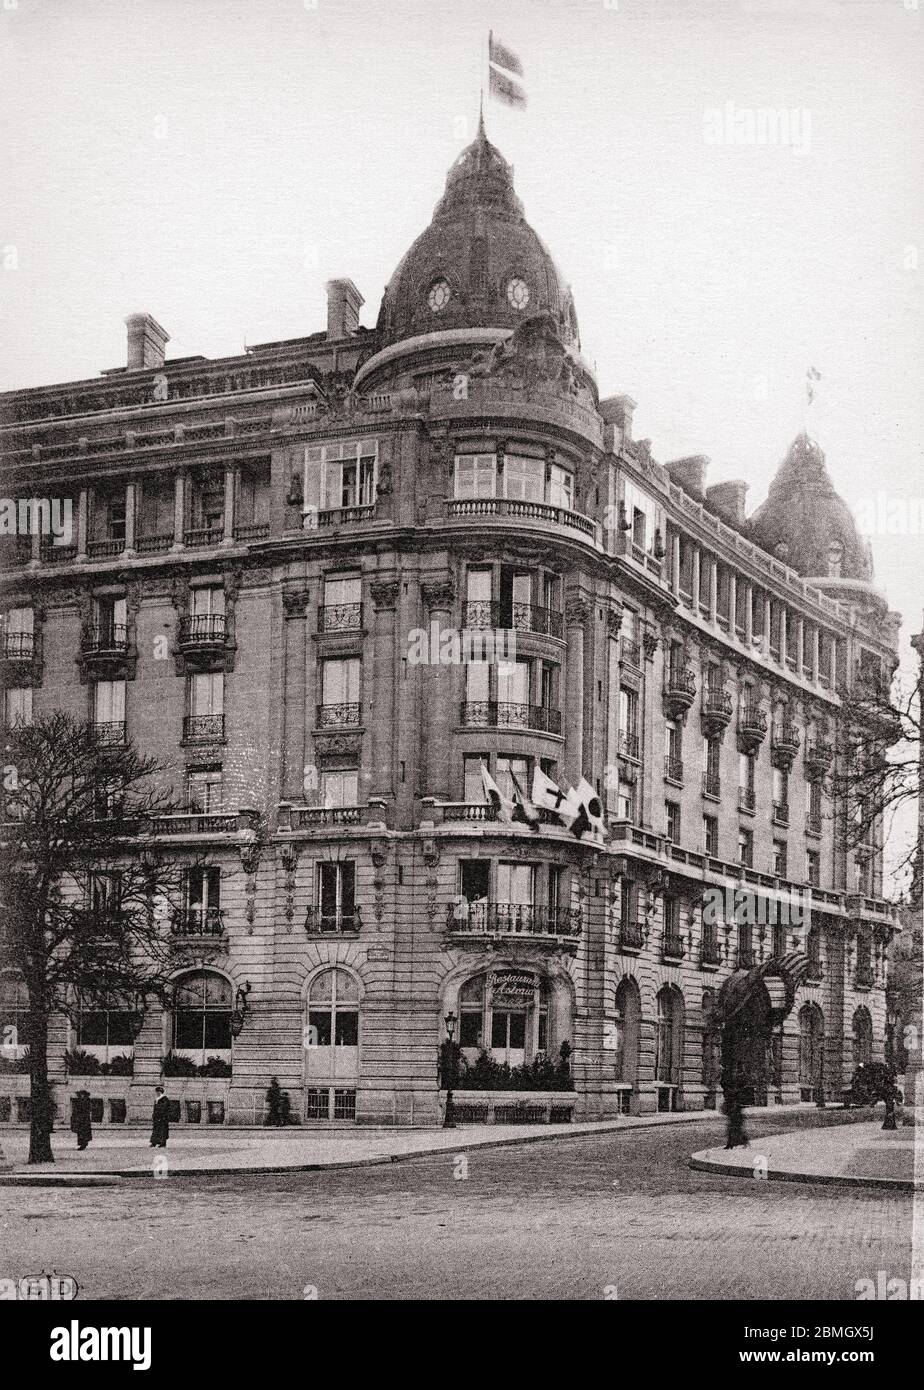 [ 1910s Japan - Japanese Red Cross Mission in Paris, WWI ] —   The mission of the Japanese Red Cross Society at the temporary hospital Hôpital Bénévole 4 bis, in Paris, during WWI.  The hospital was located at the Astoria Hotel at rue de Presbourg. The Japanese Red Cross ran it from February 15, 1915 (Taisho 4) through July 1, 1916 (Taisho 5). Notice the Japanese and Red Cross flags.  20th century vintage postcard. Stock Photo